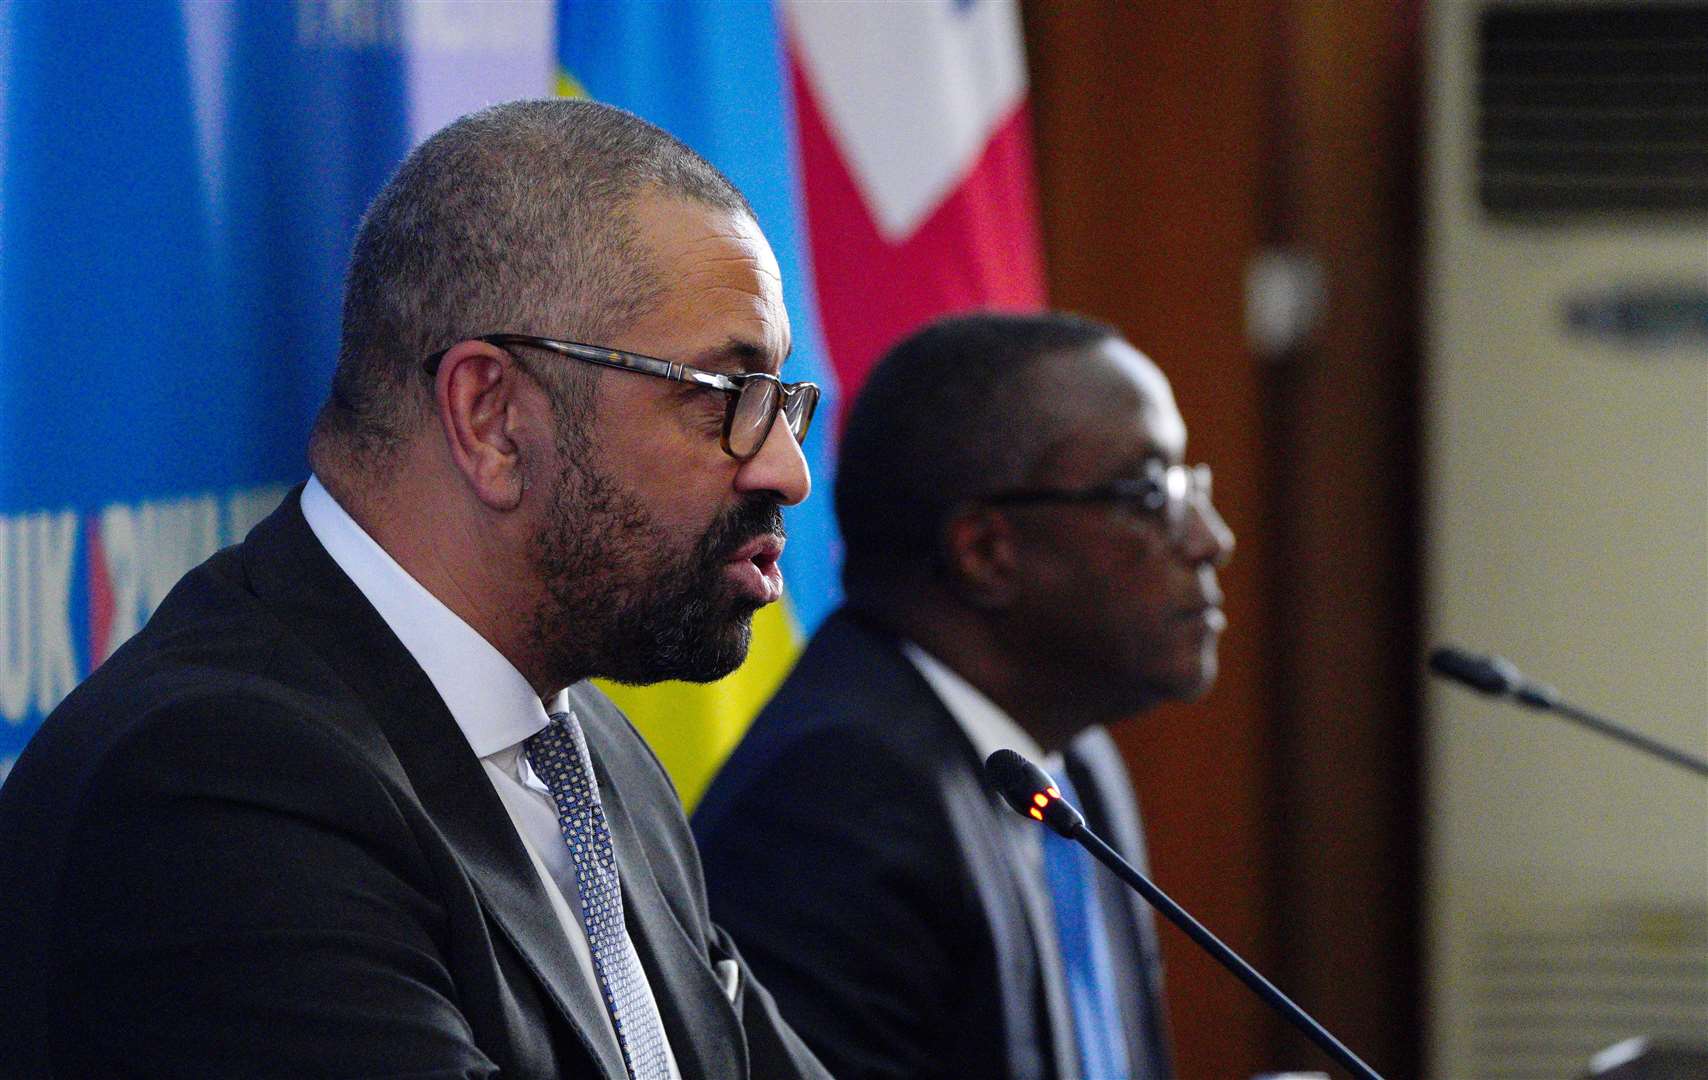 Home Secretary James Cleverly speaks during a press conference with Rwandan minister of foreign affairs Vincent Biruta (Ben Birchall/PA)